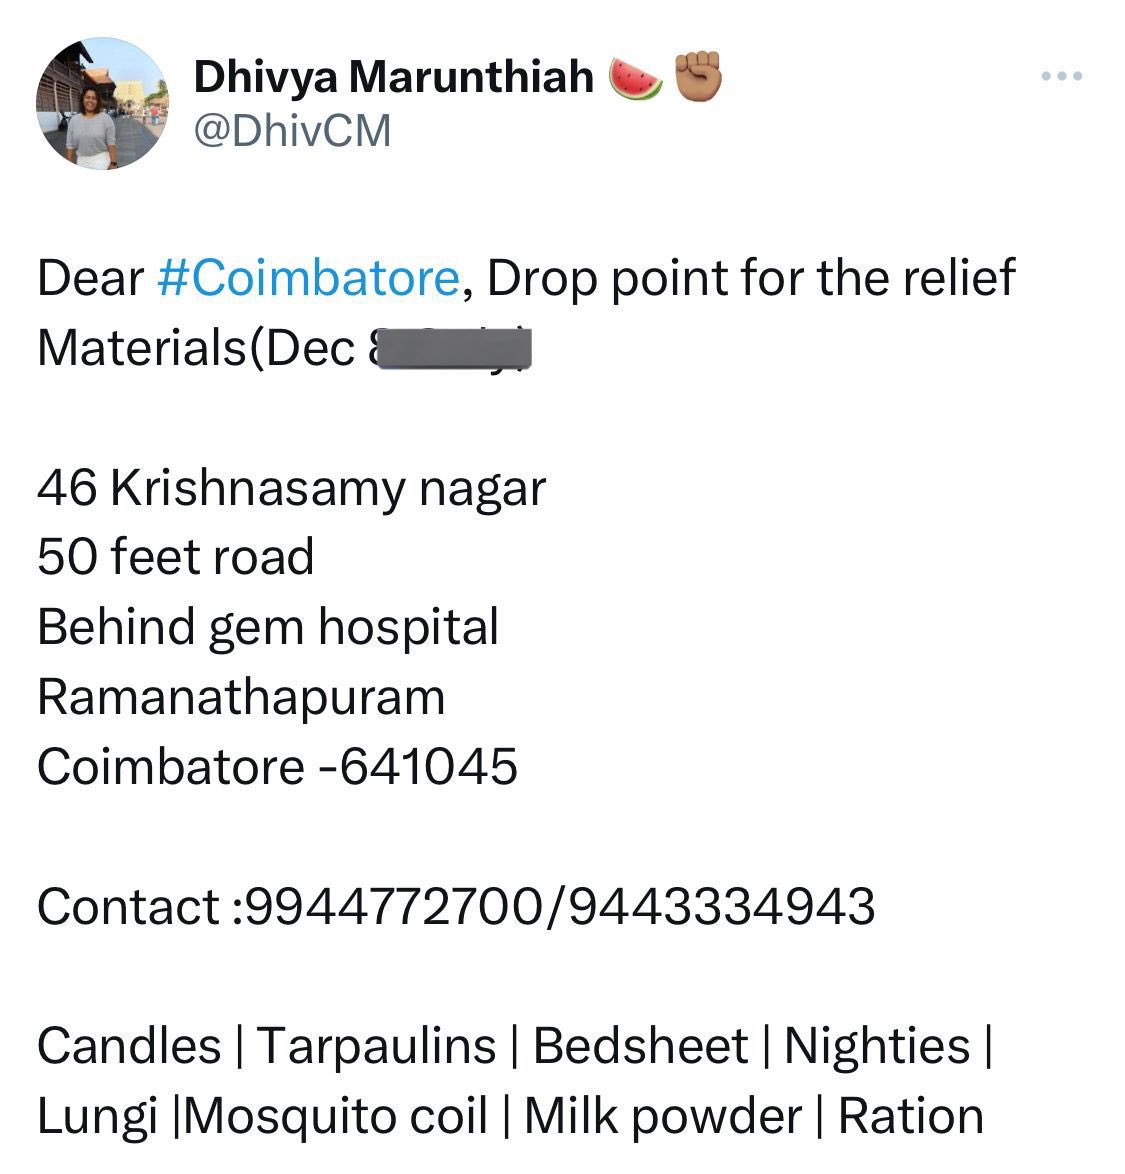 #Coimbatore Collection Hub - Relief Dec 9 : 10 AM to 6 PM Please do the needful.